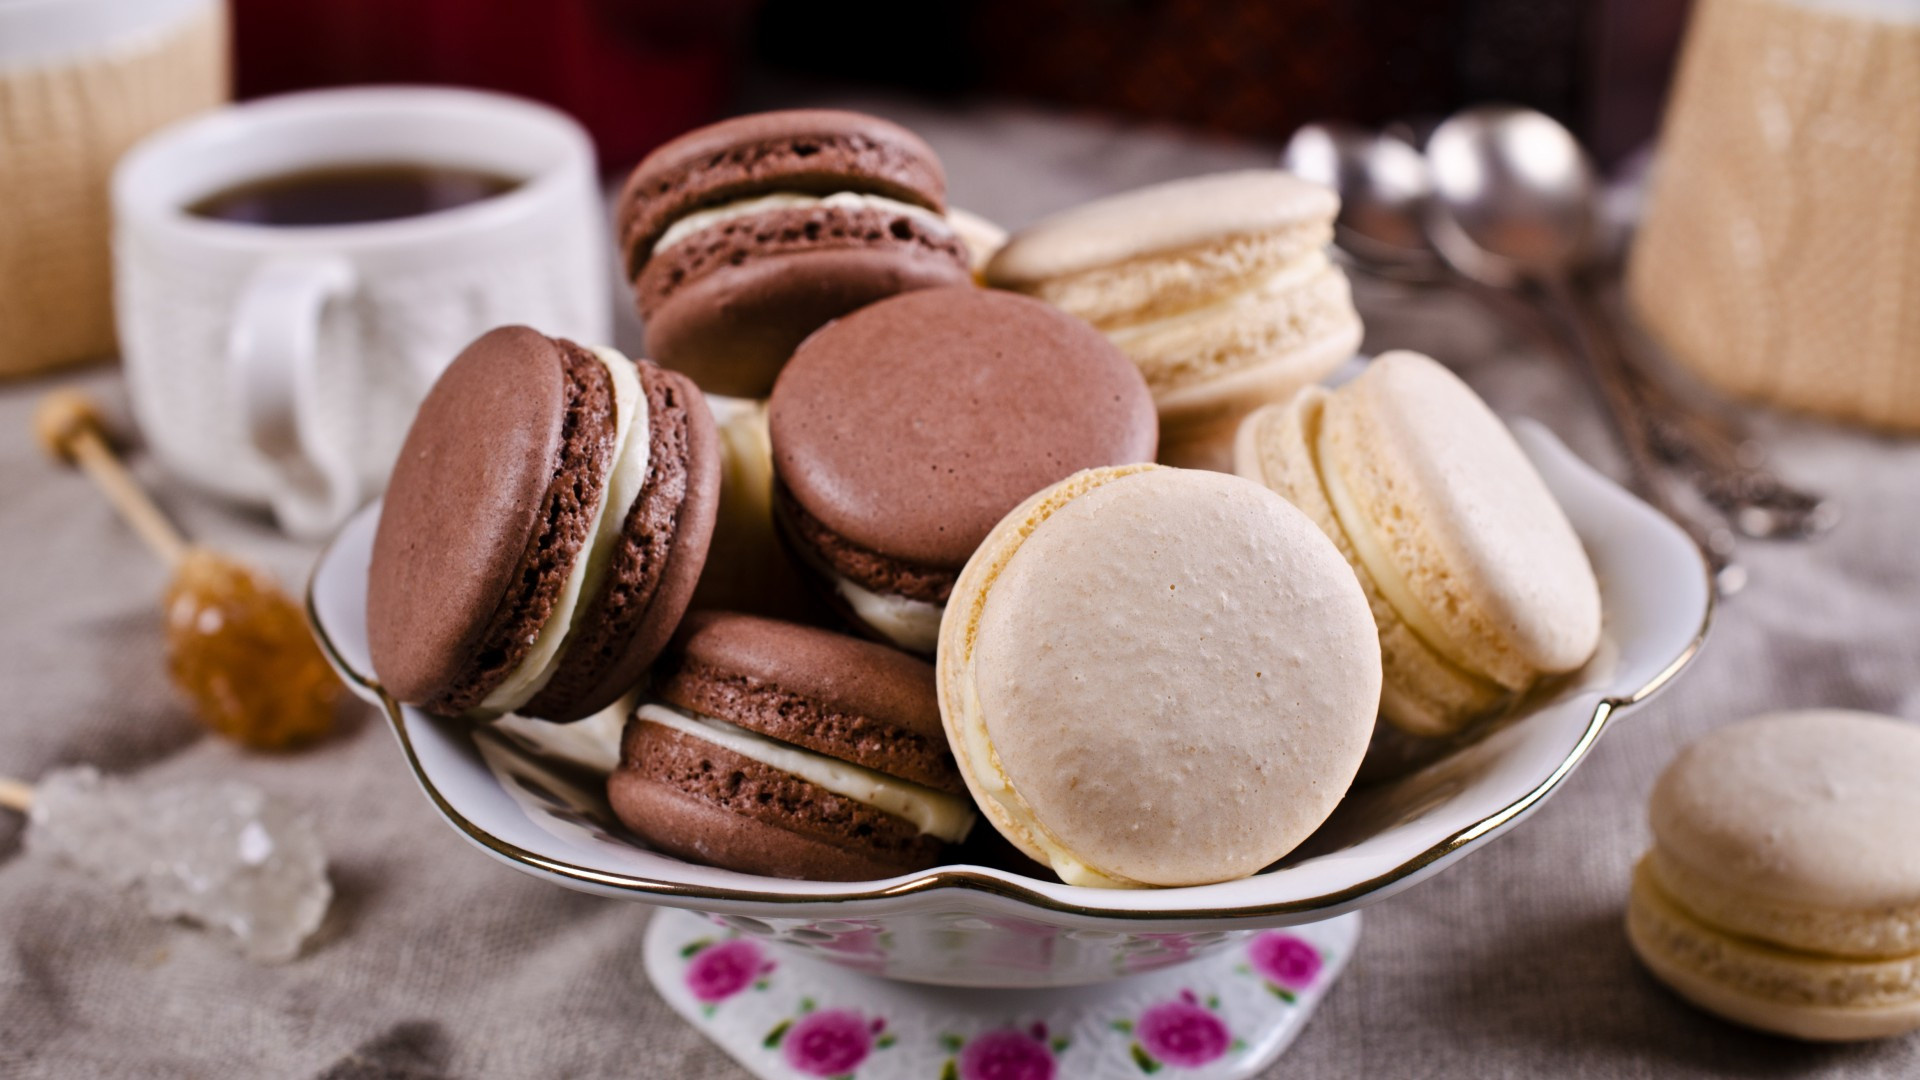 Macaron: The first written recipe in the history of macarons appeared in France in early 17th century. 1920x1080 Full HD Wallpaper.